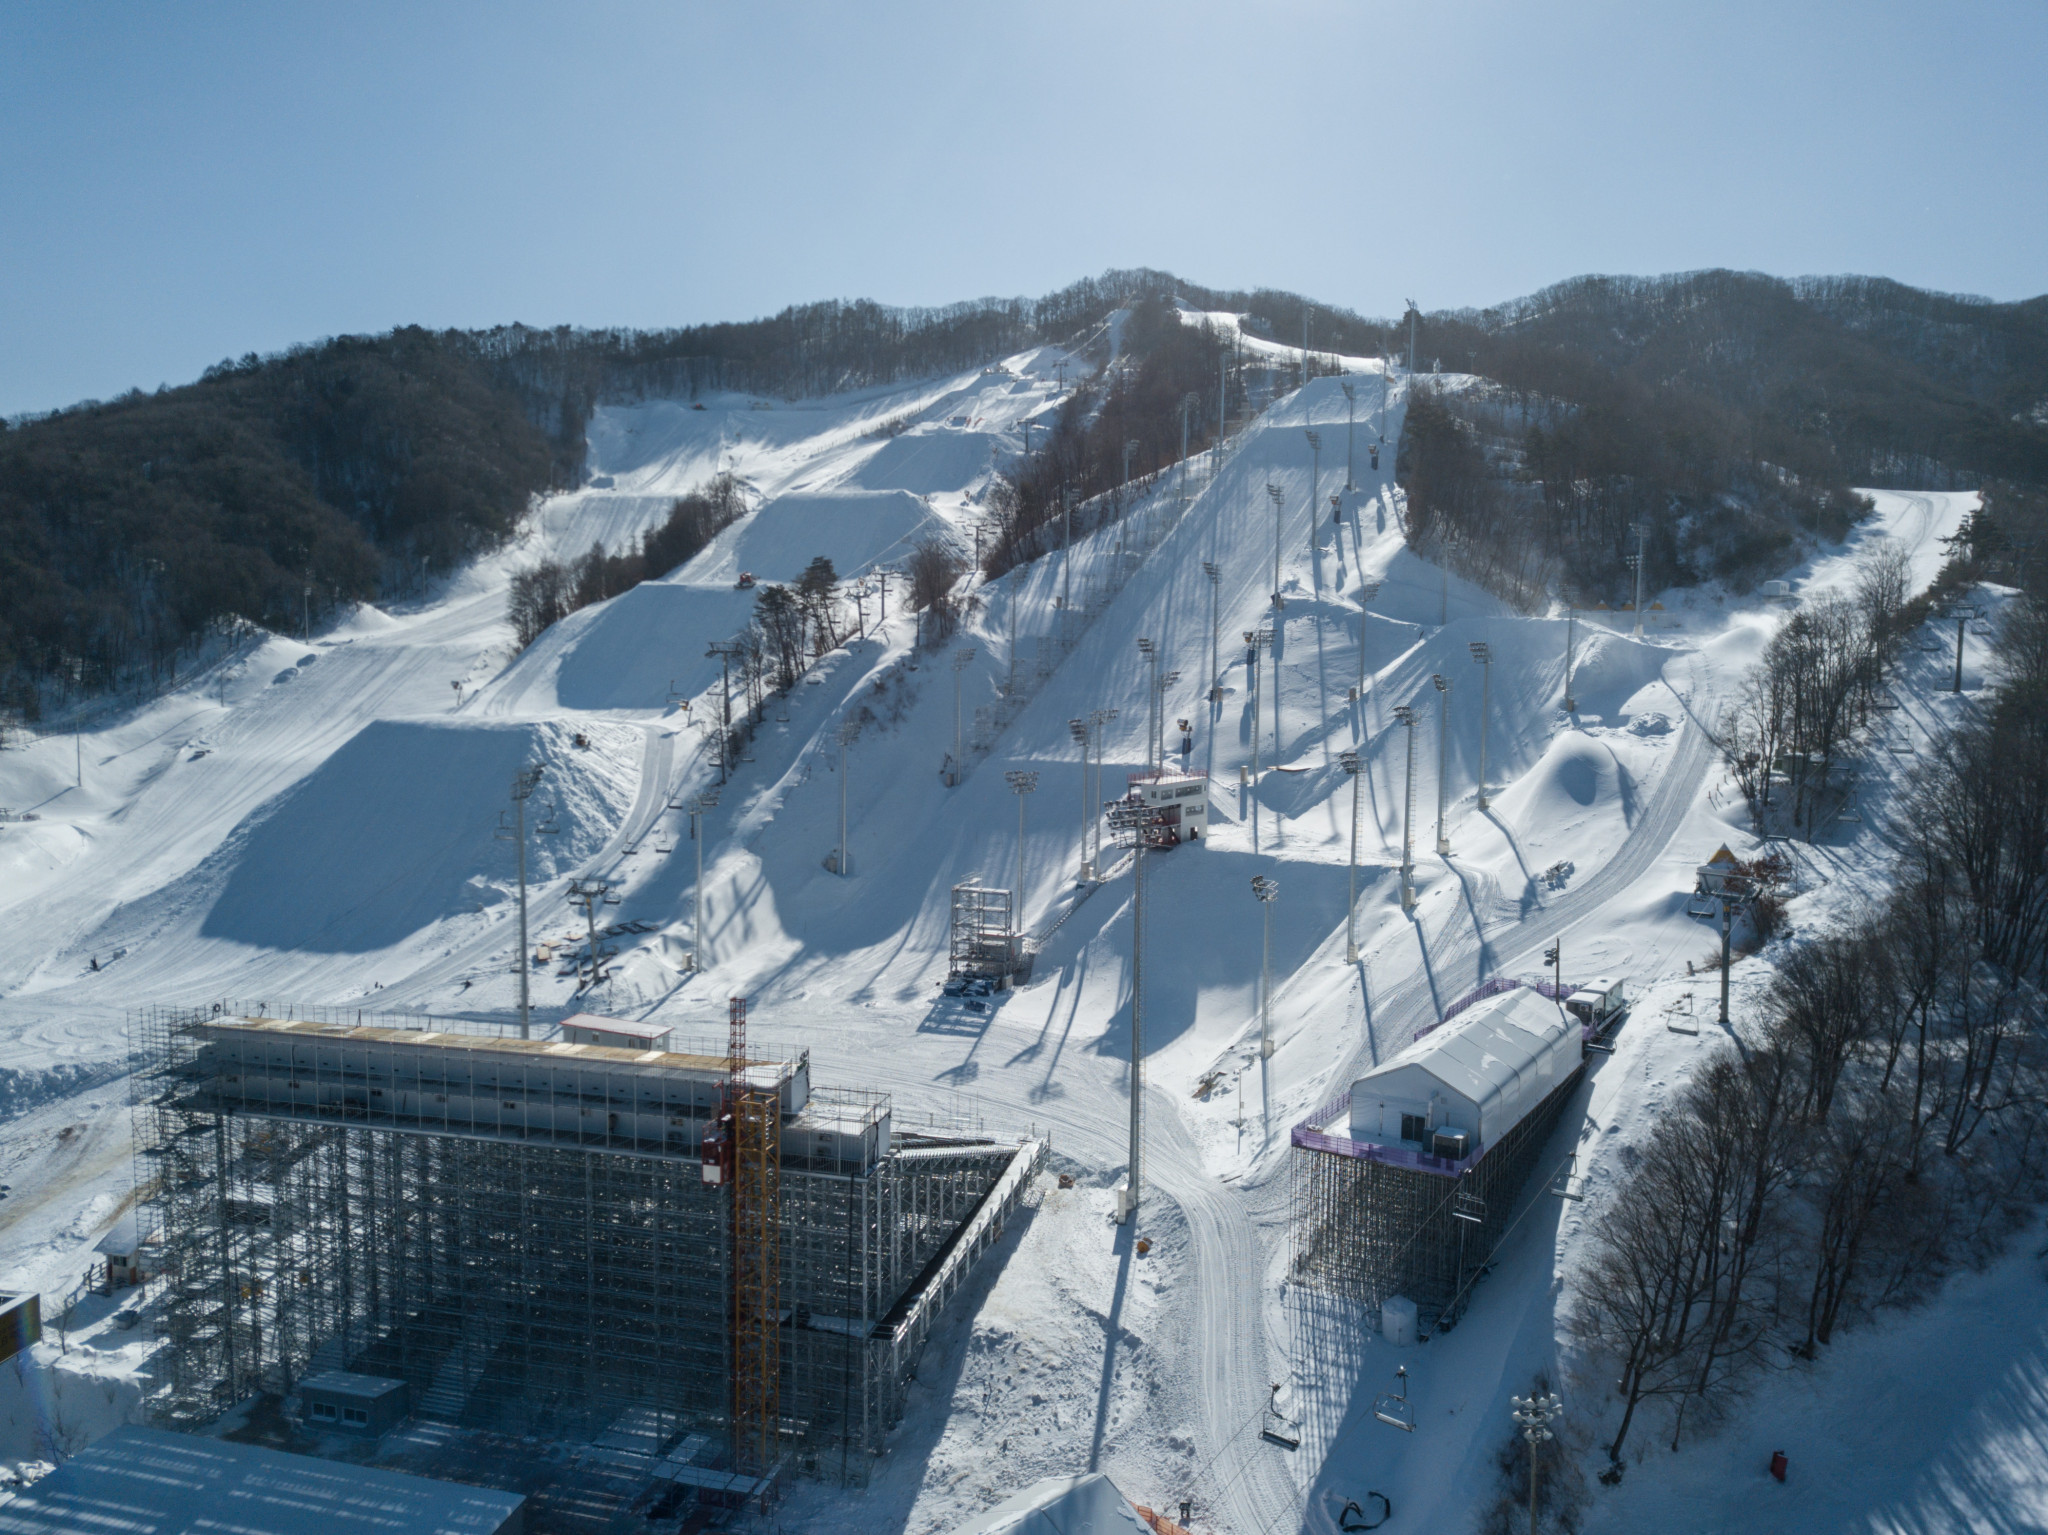 South Korea's Alpine snowboarders and mogul skiers will not stay at the Olympic Village at Pyeongchang 2018 ©Getty Images